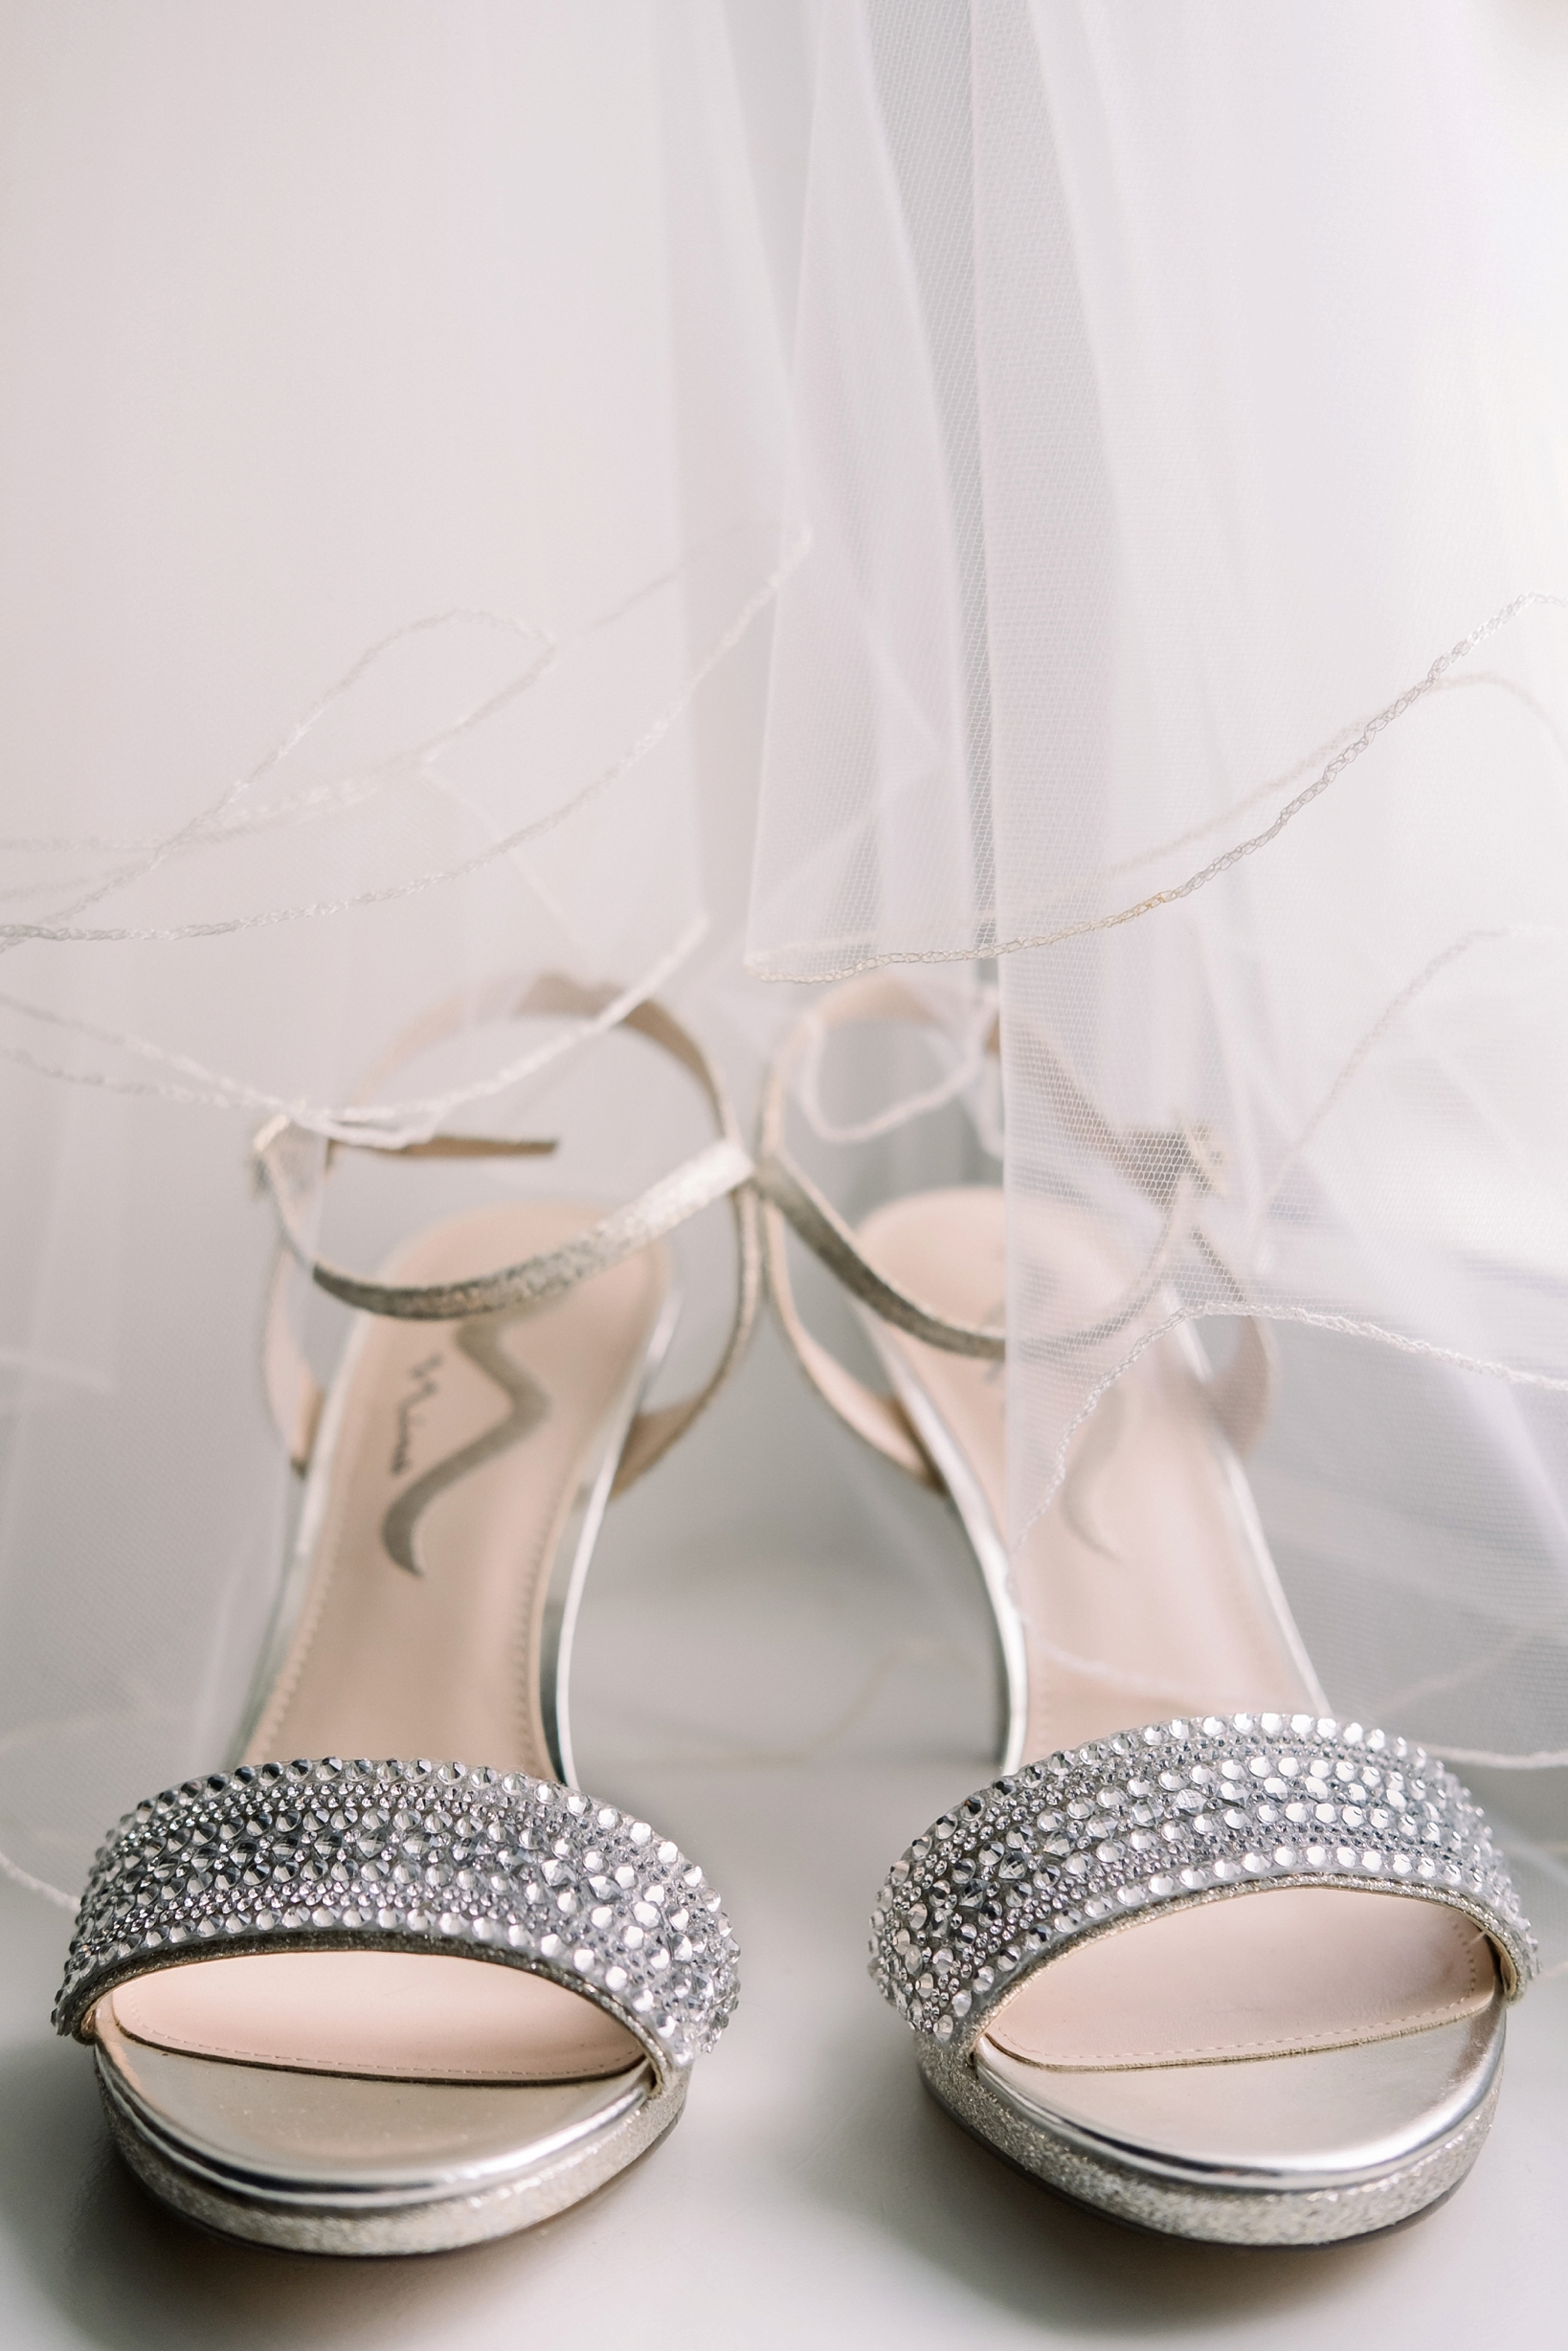 The Bride's shoes and wedding veil